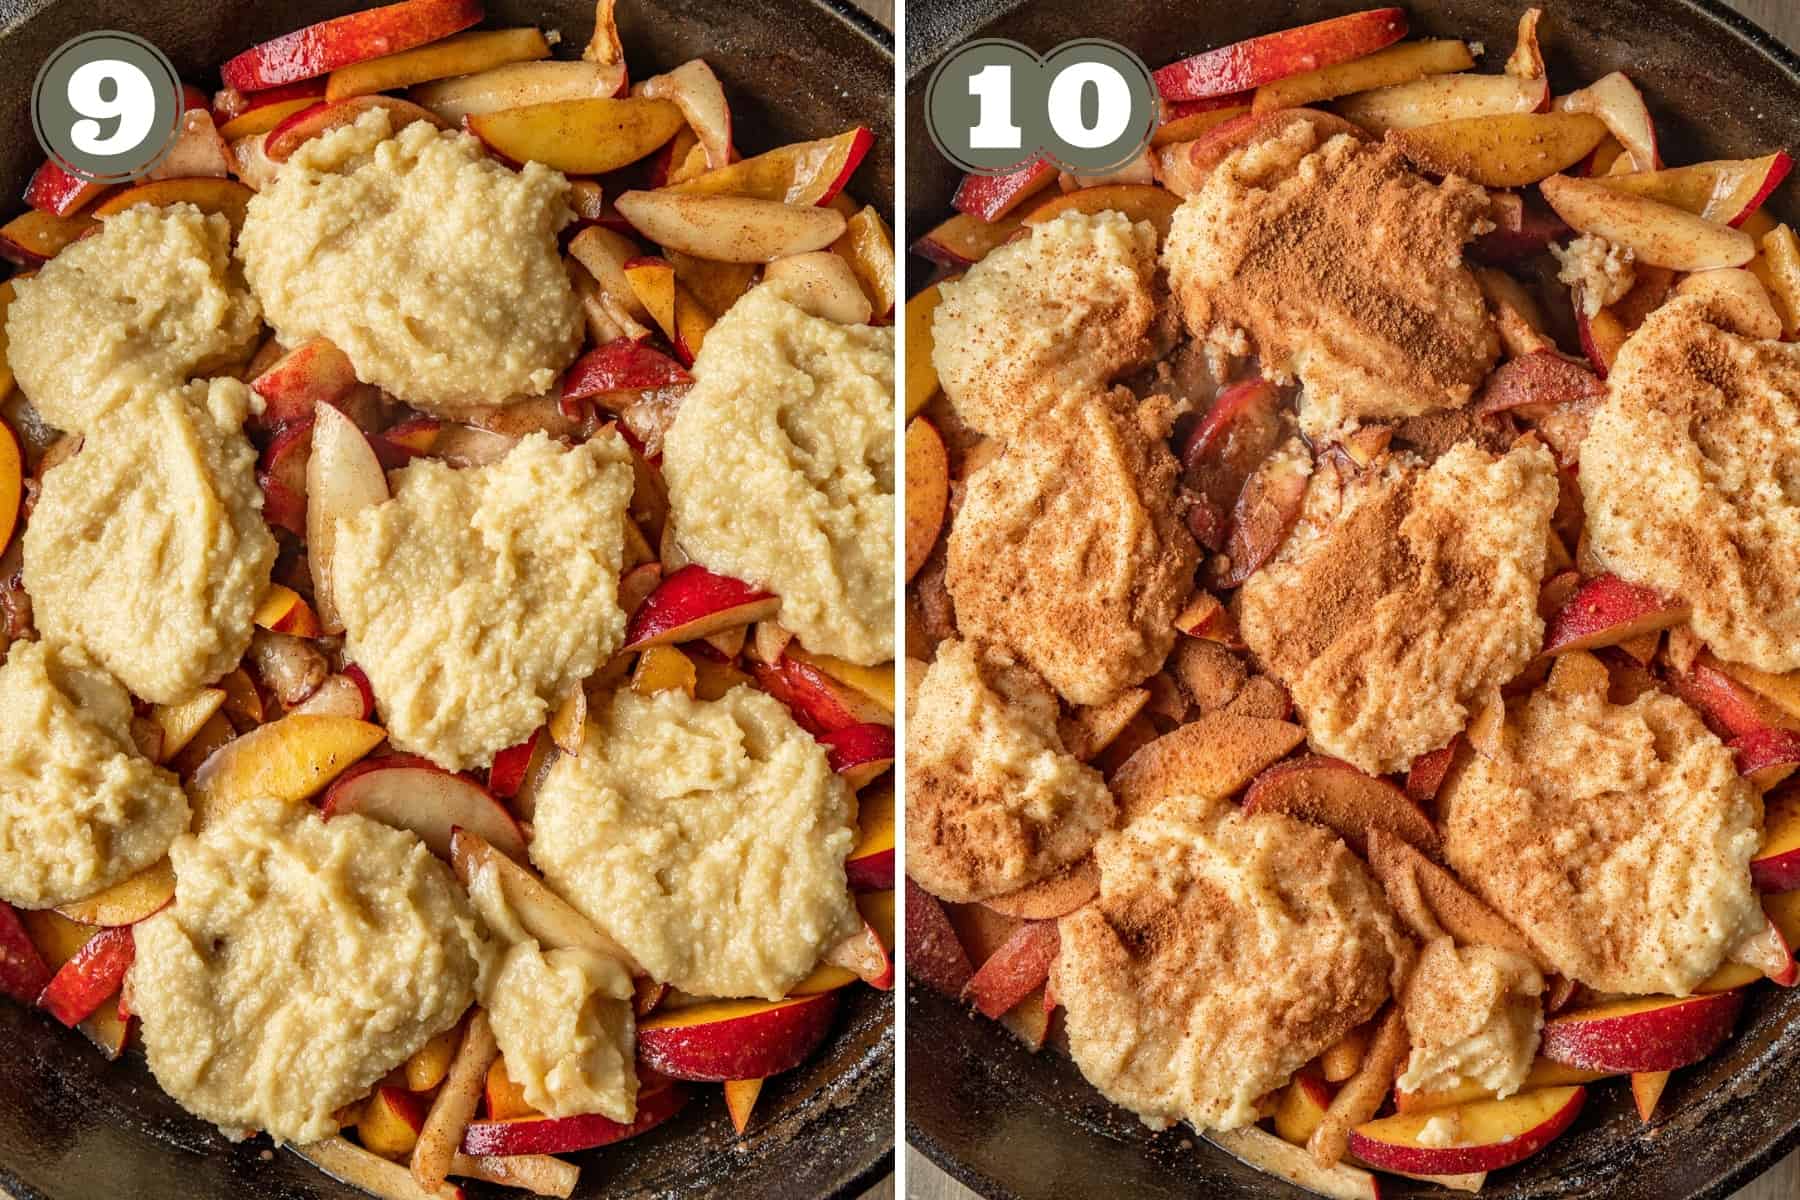 Side by side process photos showing peach slices in a cast iron pan dollaped with cobbler topping.